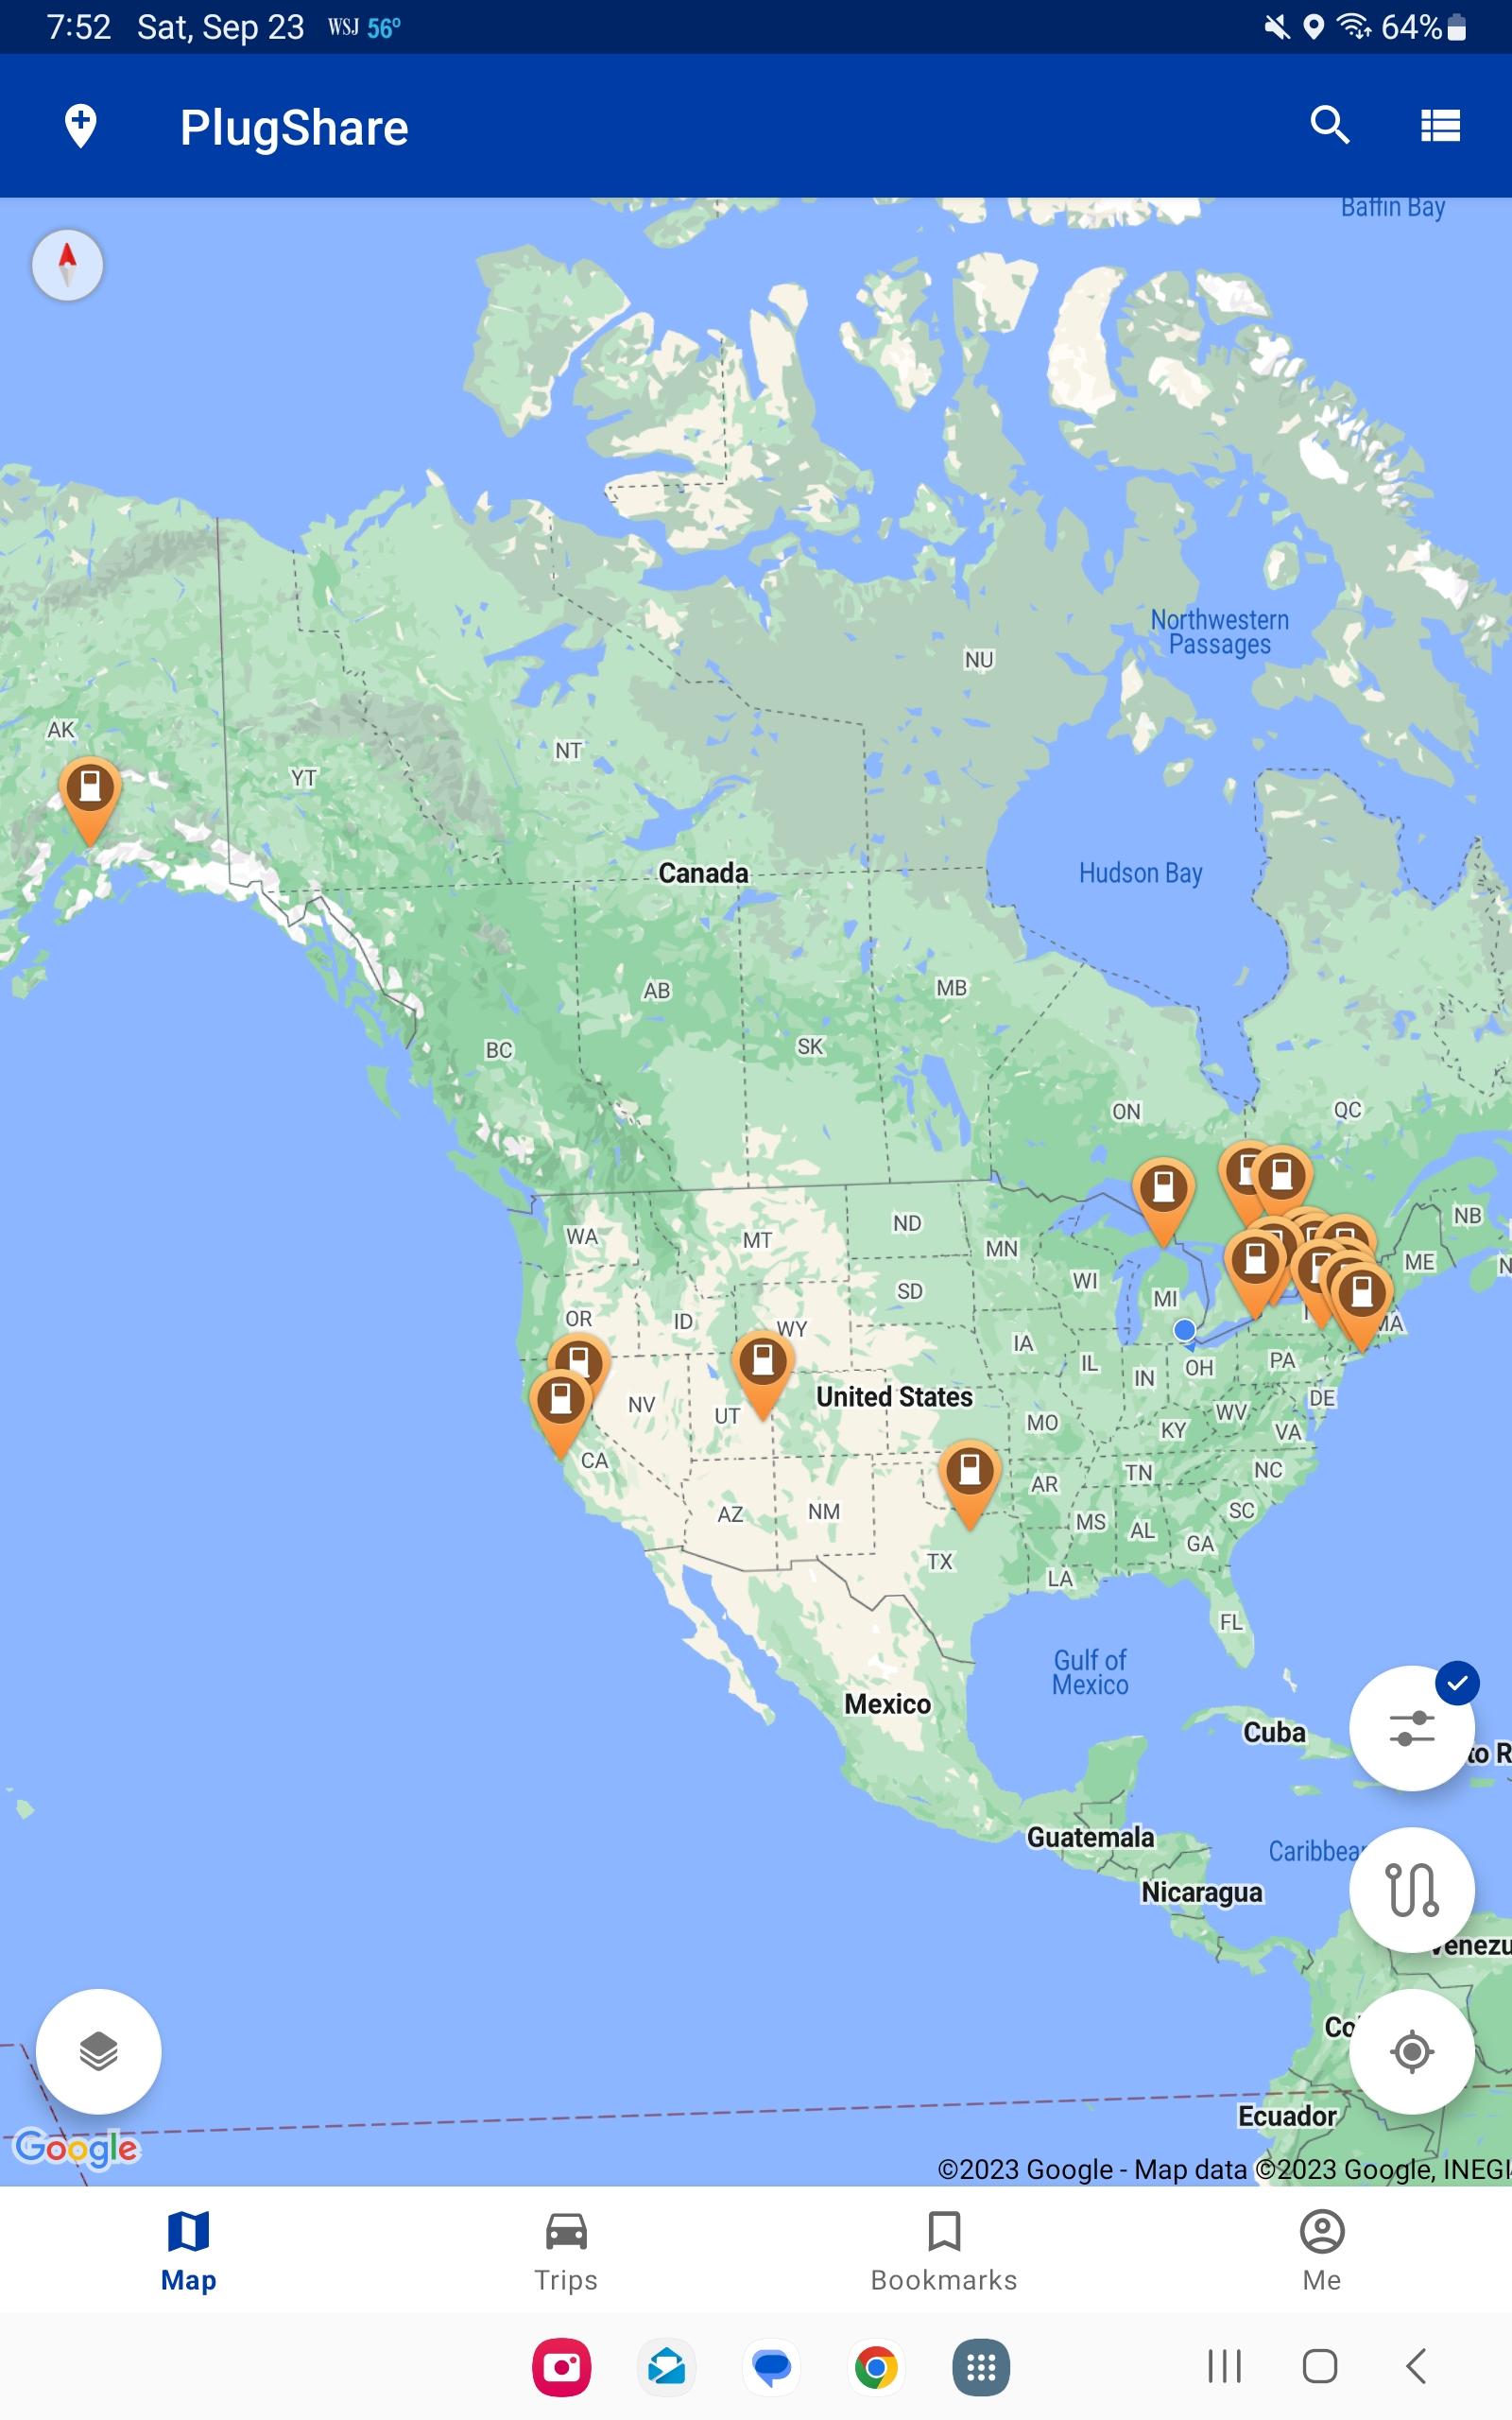 Ford F-150 Lightning Tesla Supercharger network now up to 66 locations with Magic Dock (4/17/24) Screenshot_20230923_075245_PlugShare